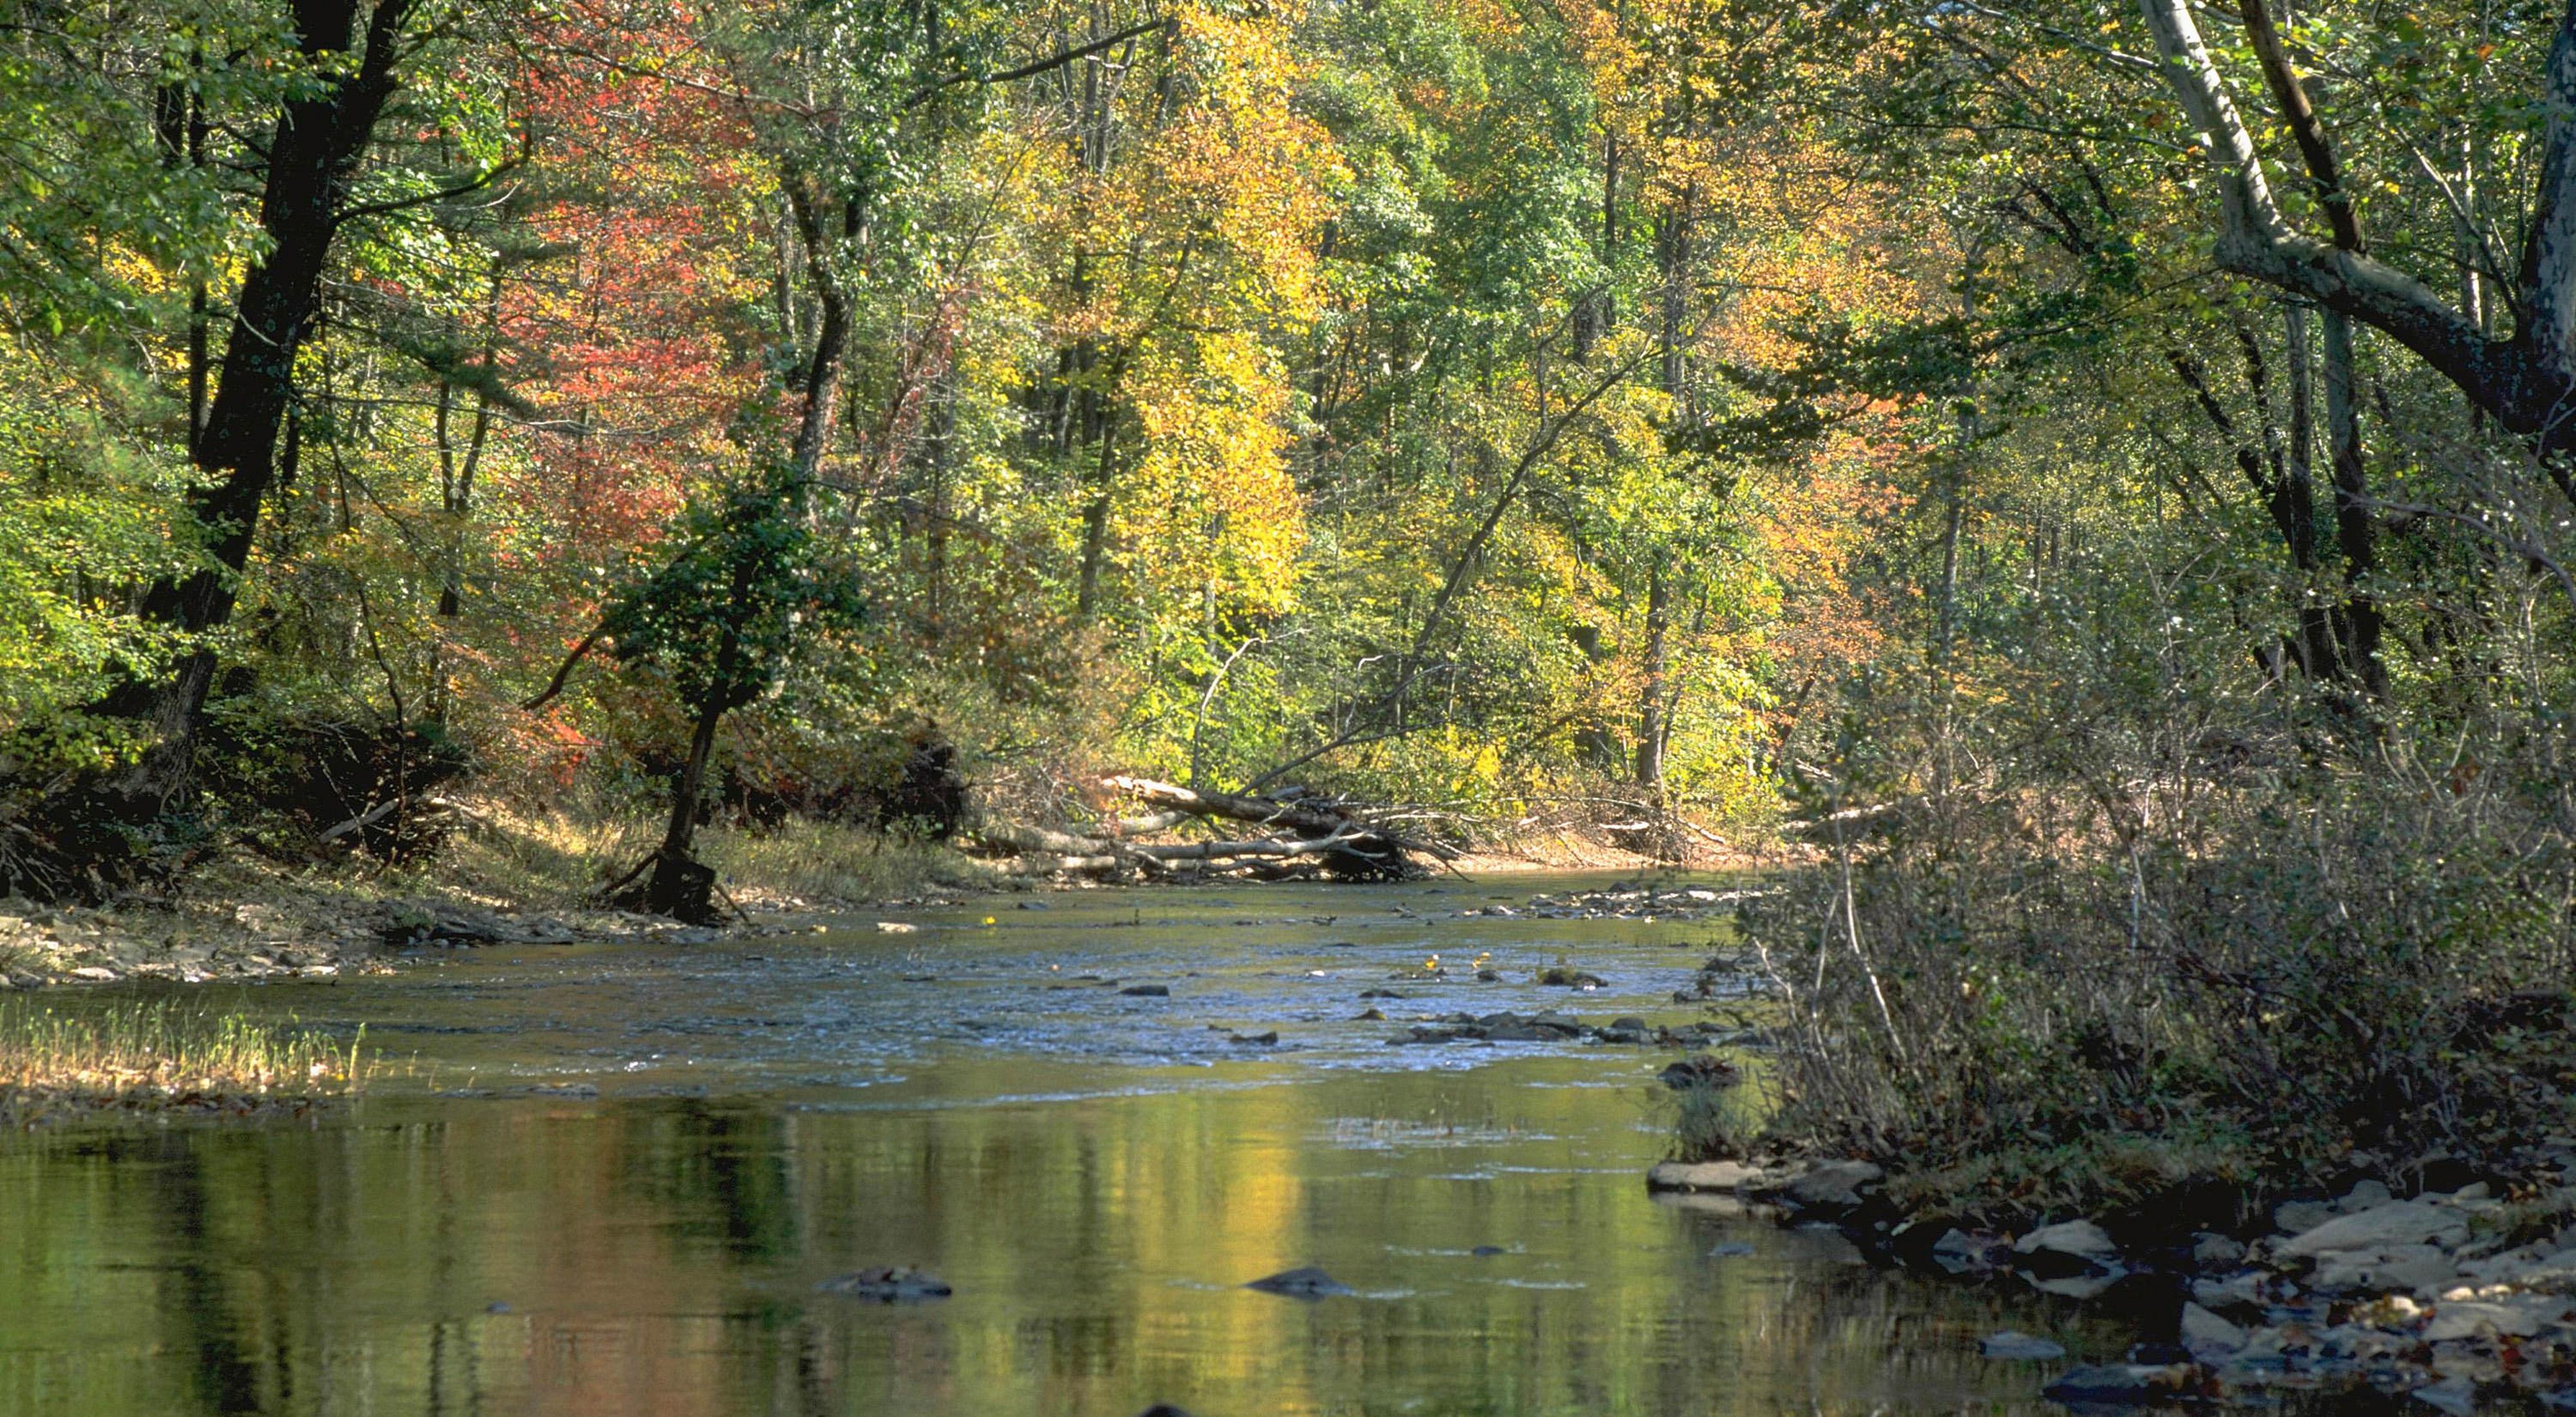 A wide, shallow creek curves between two heavily forested banks. The trees show autumn colors of red and gold. The water ripples over small rocks in the center of the creek.